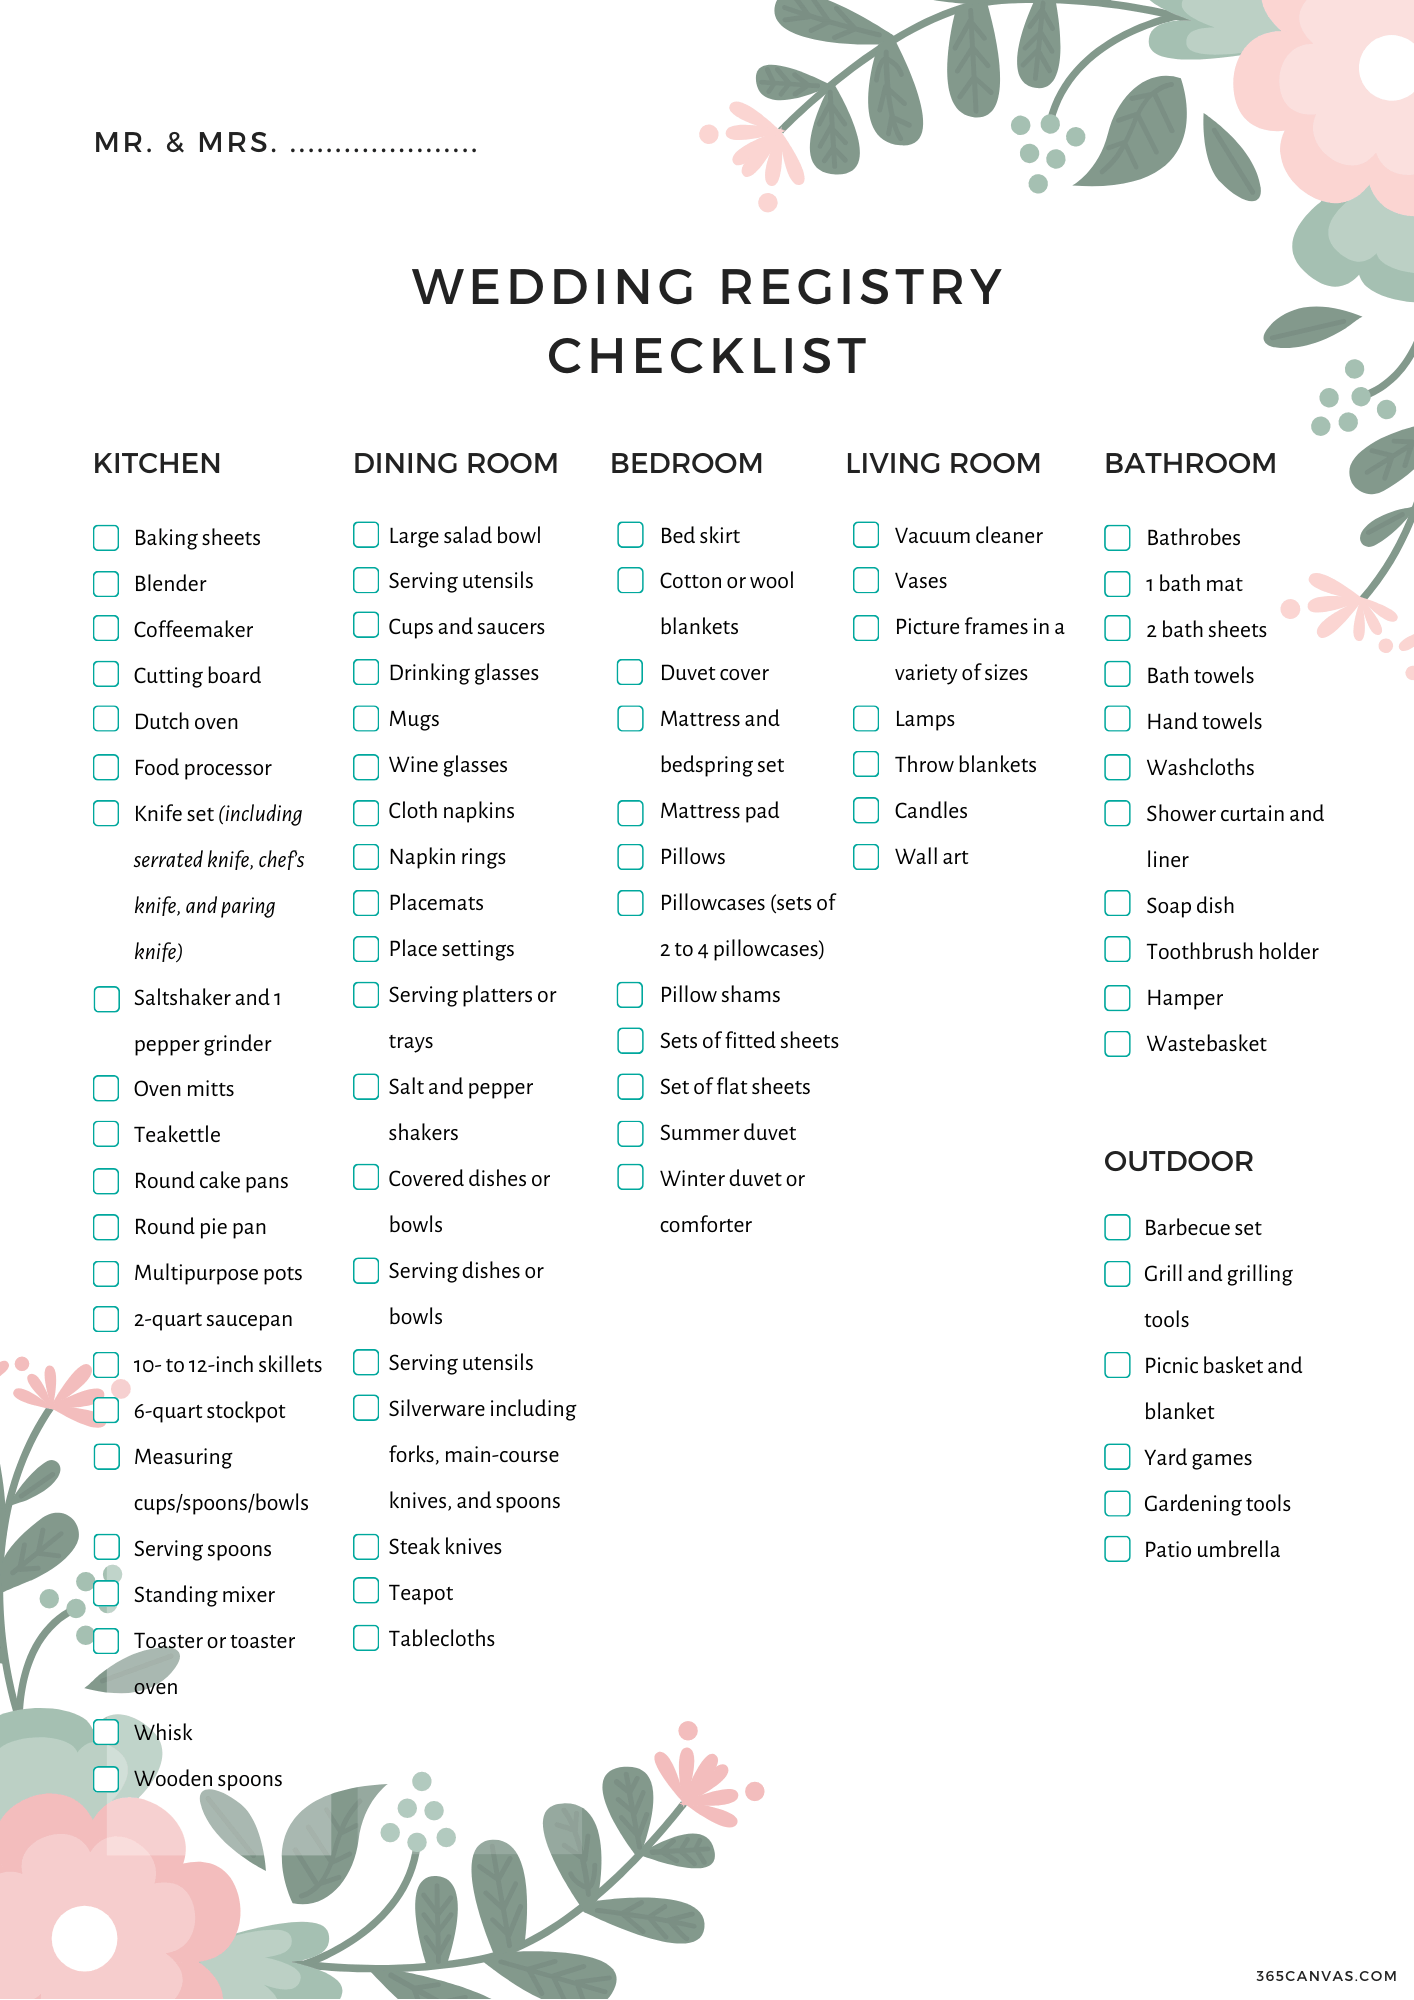 The Complete Wedding Registry Checklist Free Printable For Couples